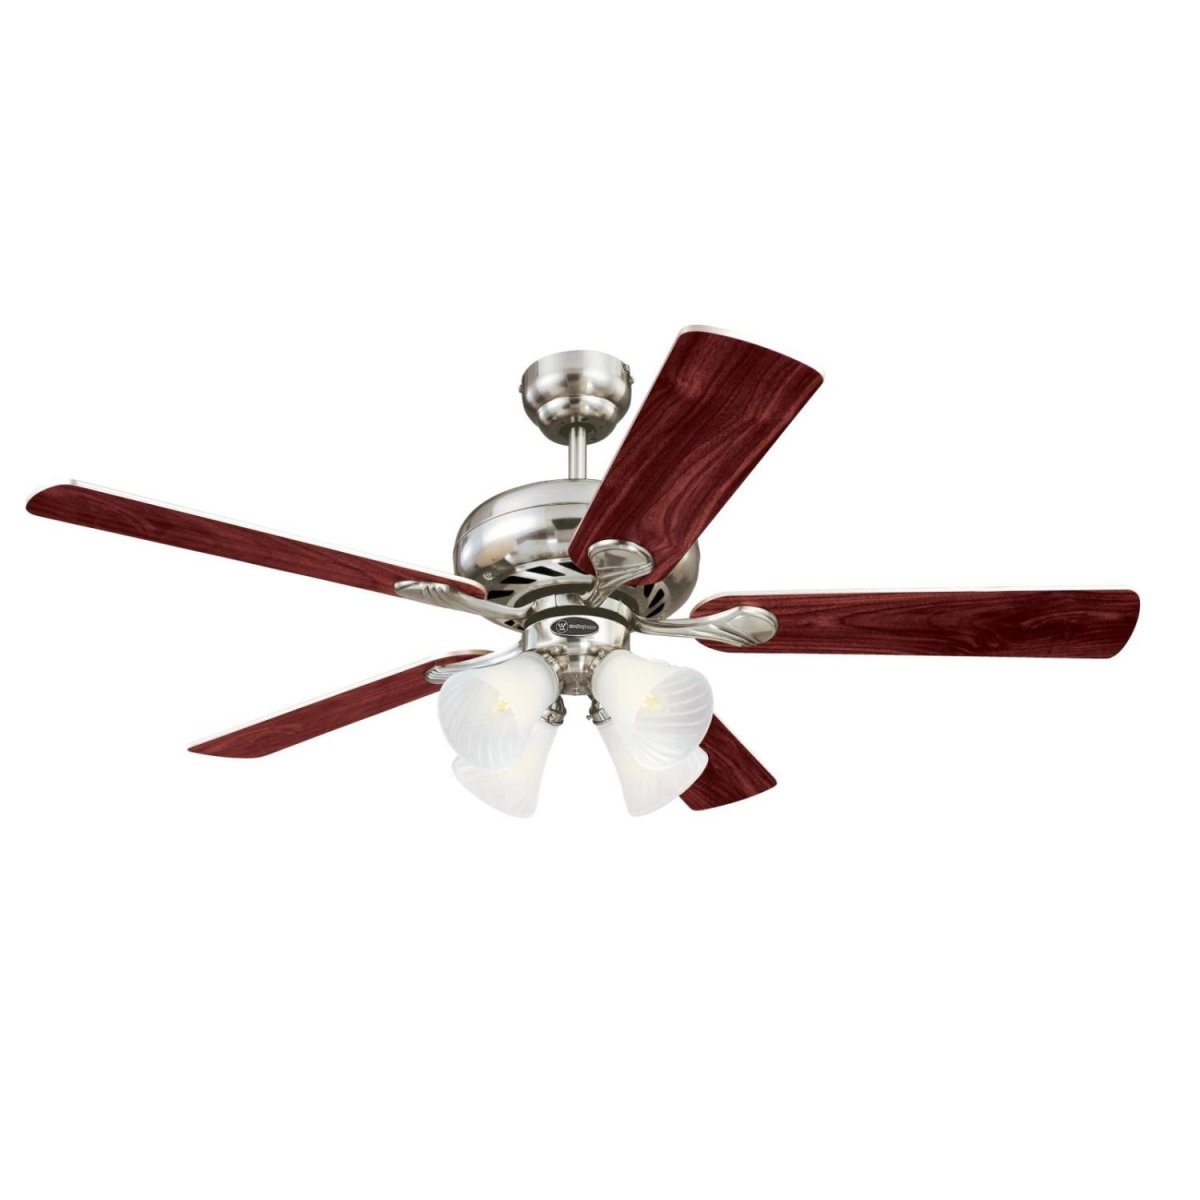 Picture of Westinghouse 7235900 52 in. Ceiling Fan with Dimmable LED Light Fixture Brushed Nickel Finish Reversible Blades Rosewood & Light Maple Frosted Swirl Glass